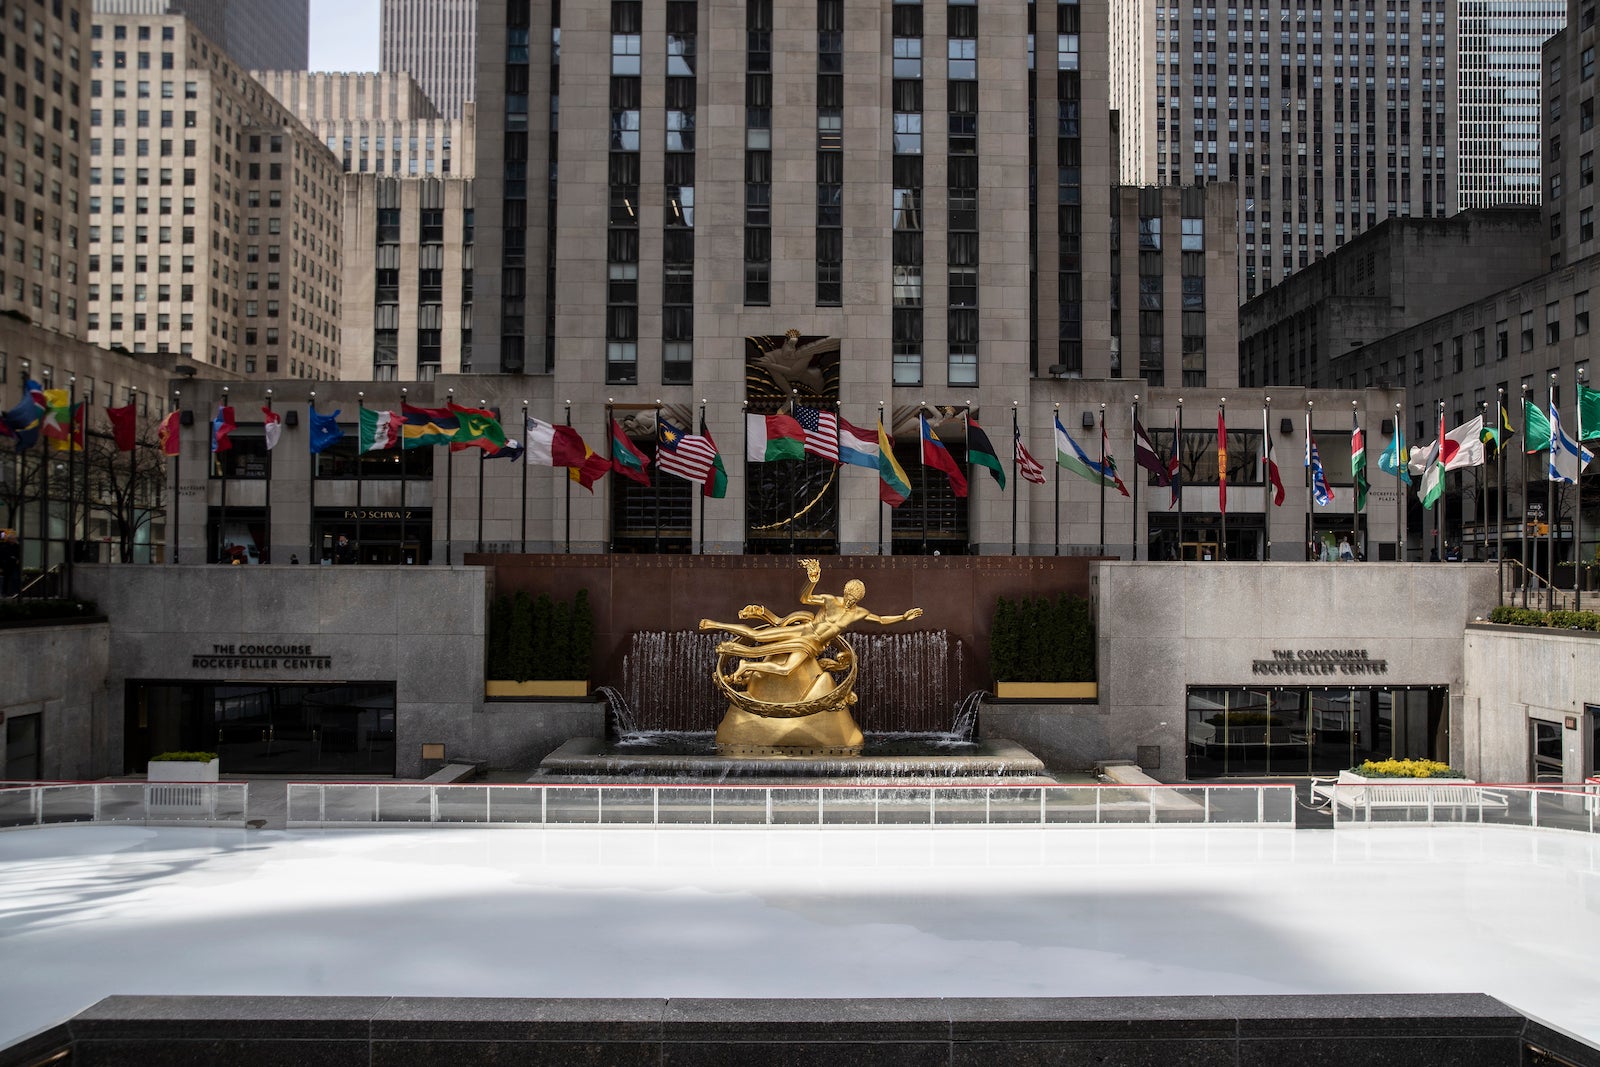 Rockefeller plaza ice skating rink and gold statue